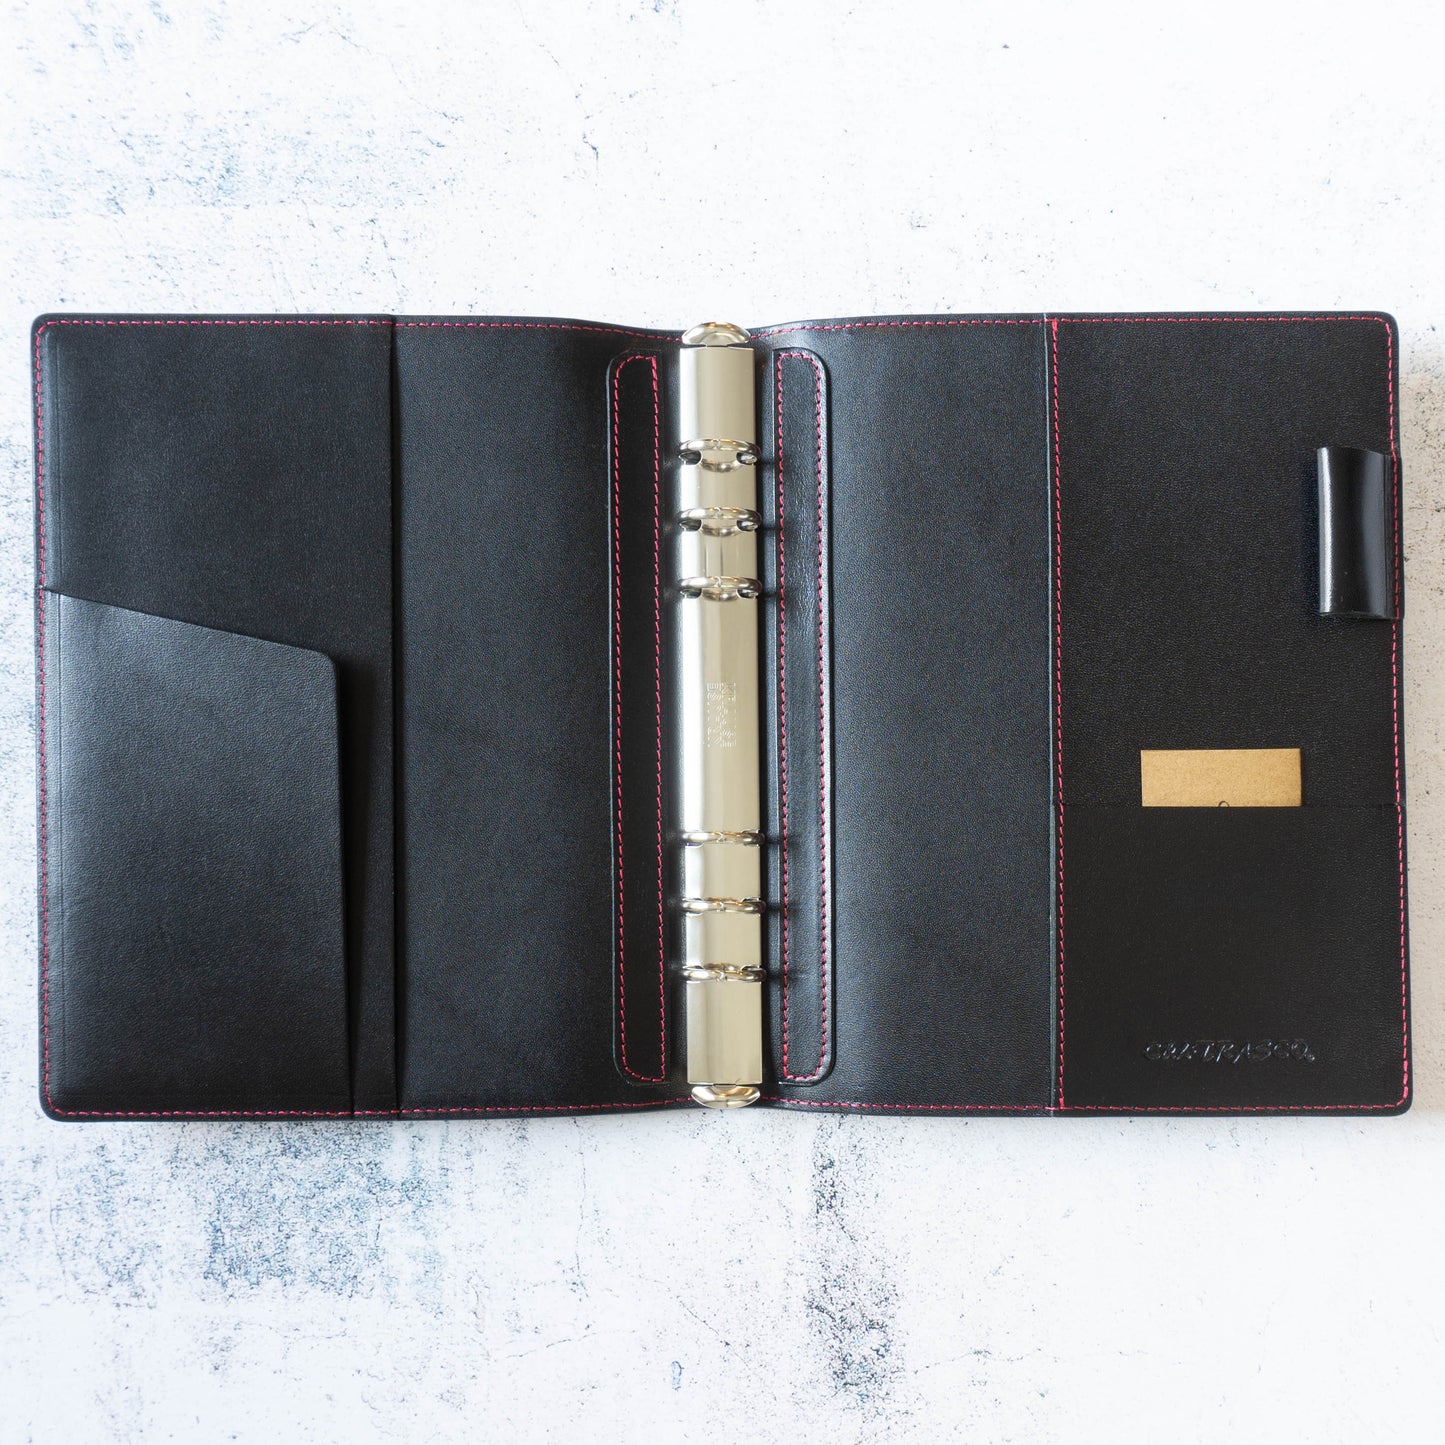 C&L TRASCO ≪CP Series≫ Personal Planner Binder Cover A5 Size 20mm 6 rings binder Genuine Leather (Carbon Pattern Leather x Tochigi Leather)